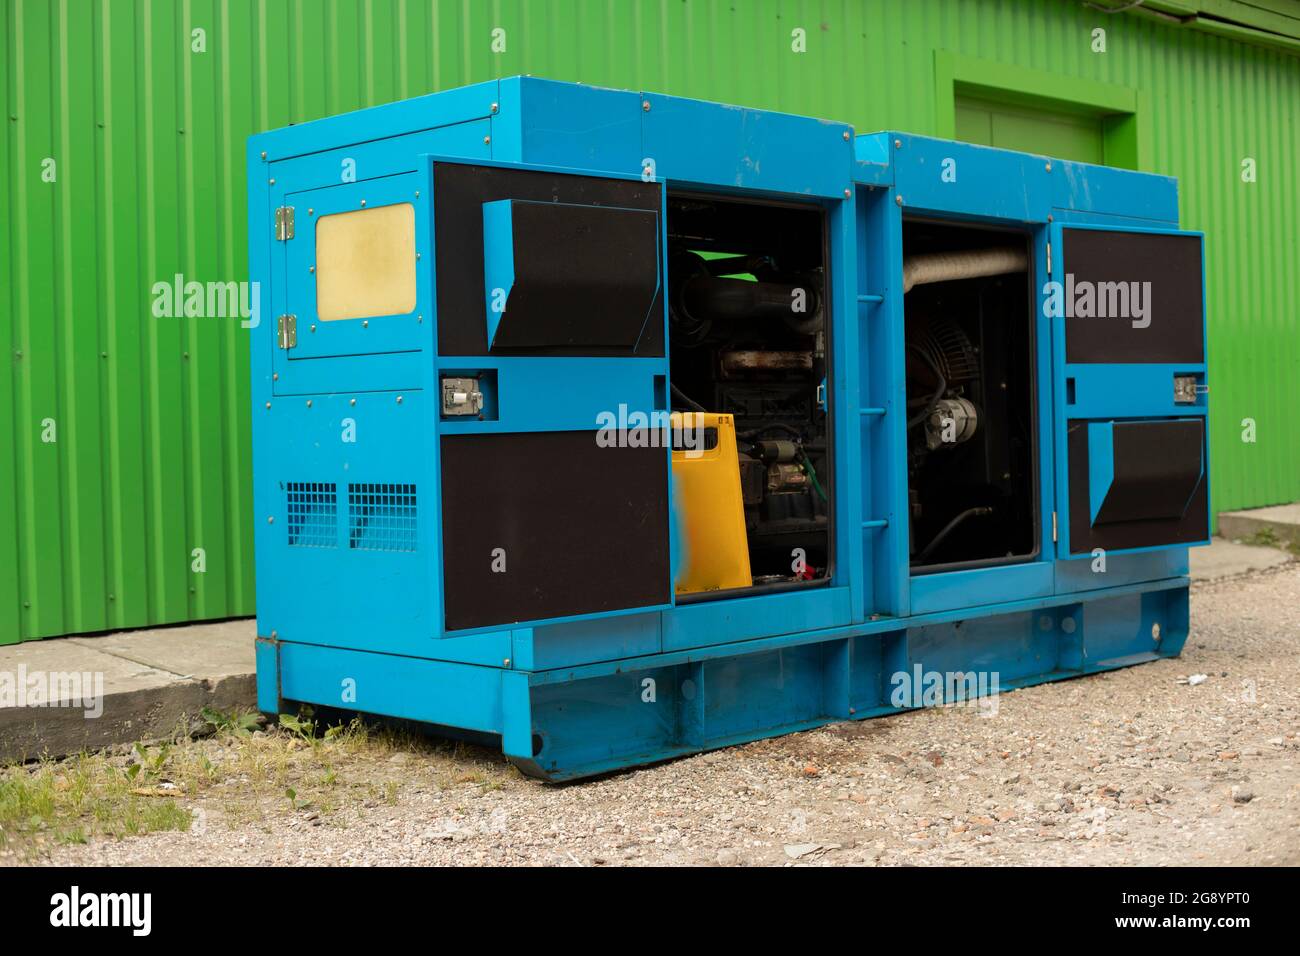 Electricity generator. Outdoor cooling system. Additional food outside. Cooling support equipment. Stock Photo